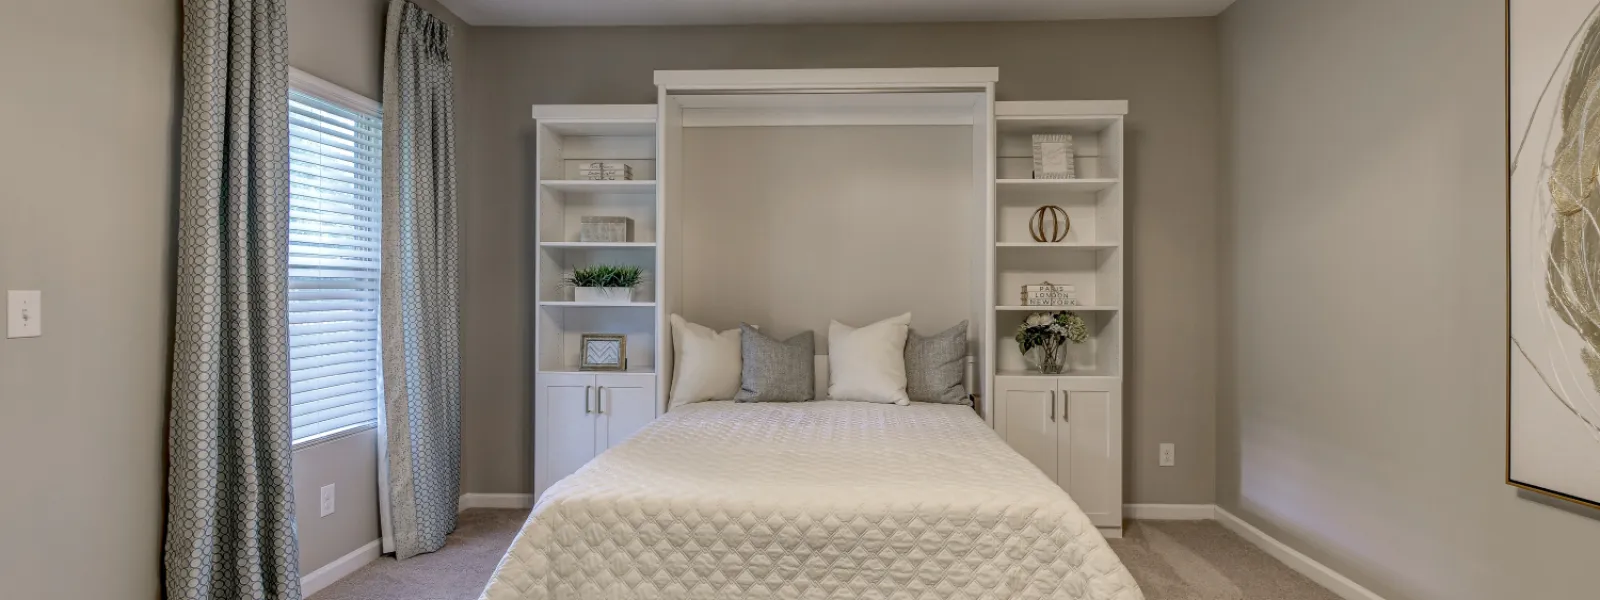 Murphy Beds Can Transform Your Room